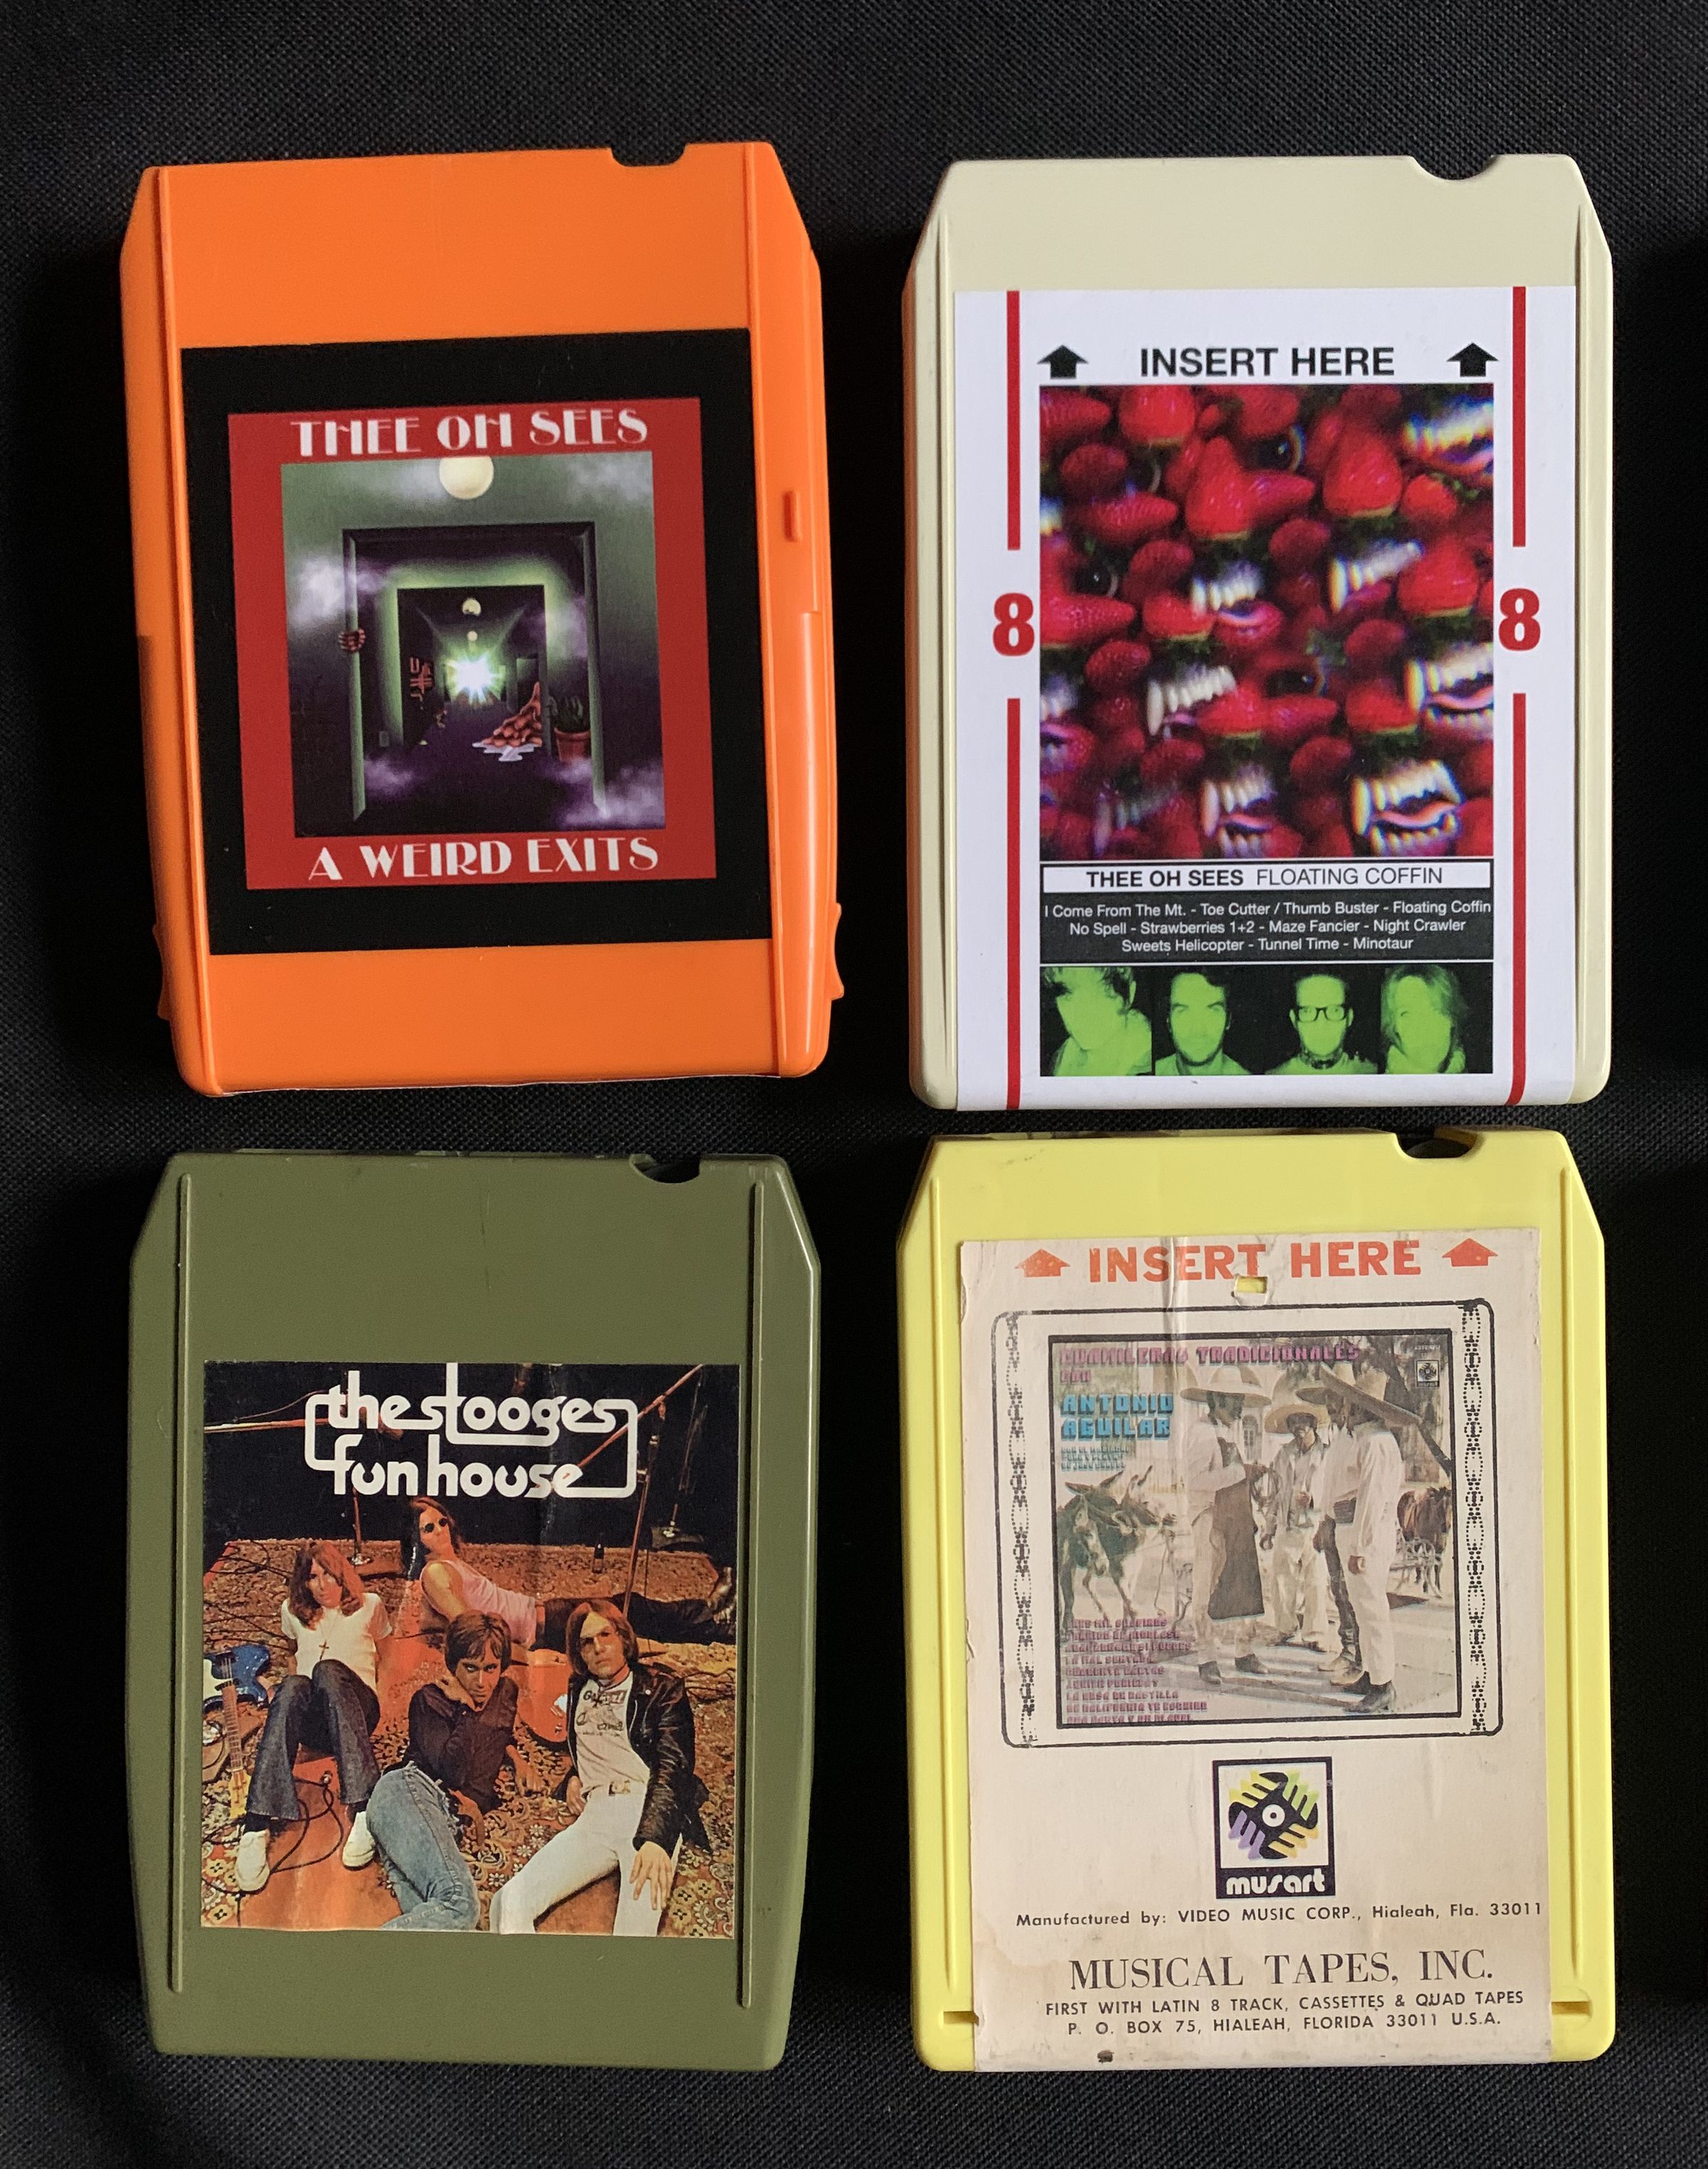 Top: Reconditioned 8-track cartridges with new labels. Botton: Original labeling of other cartridges